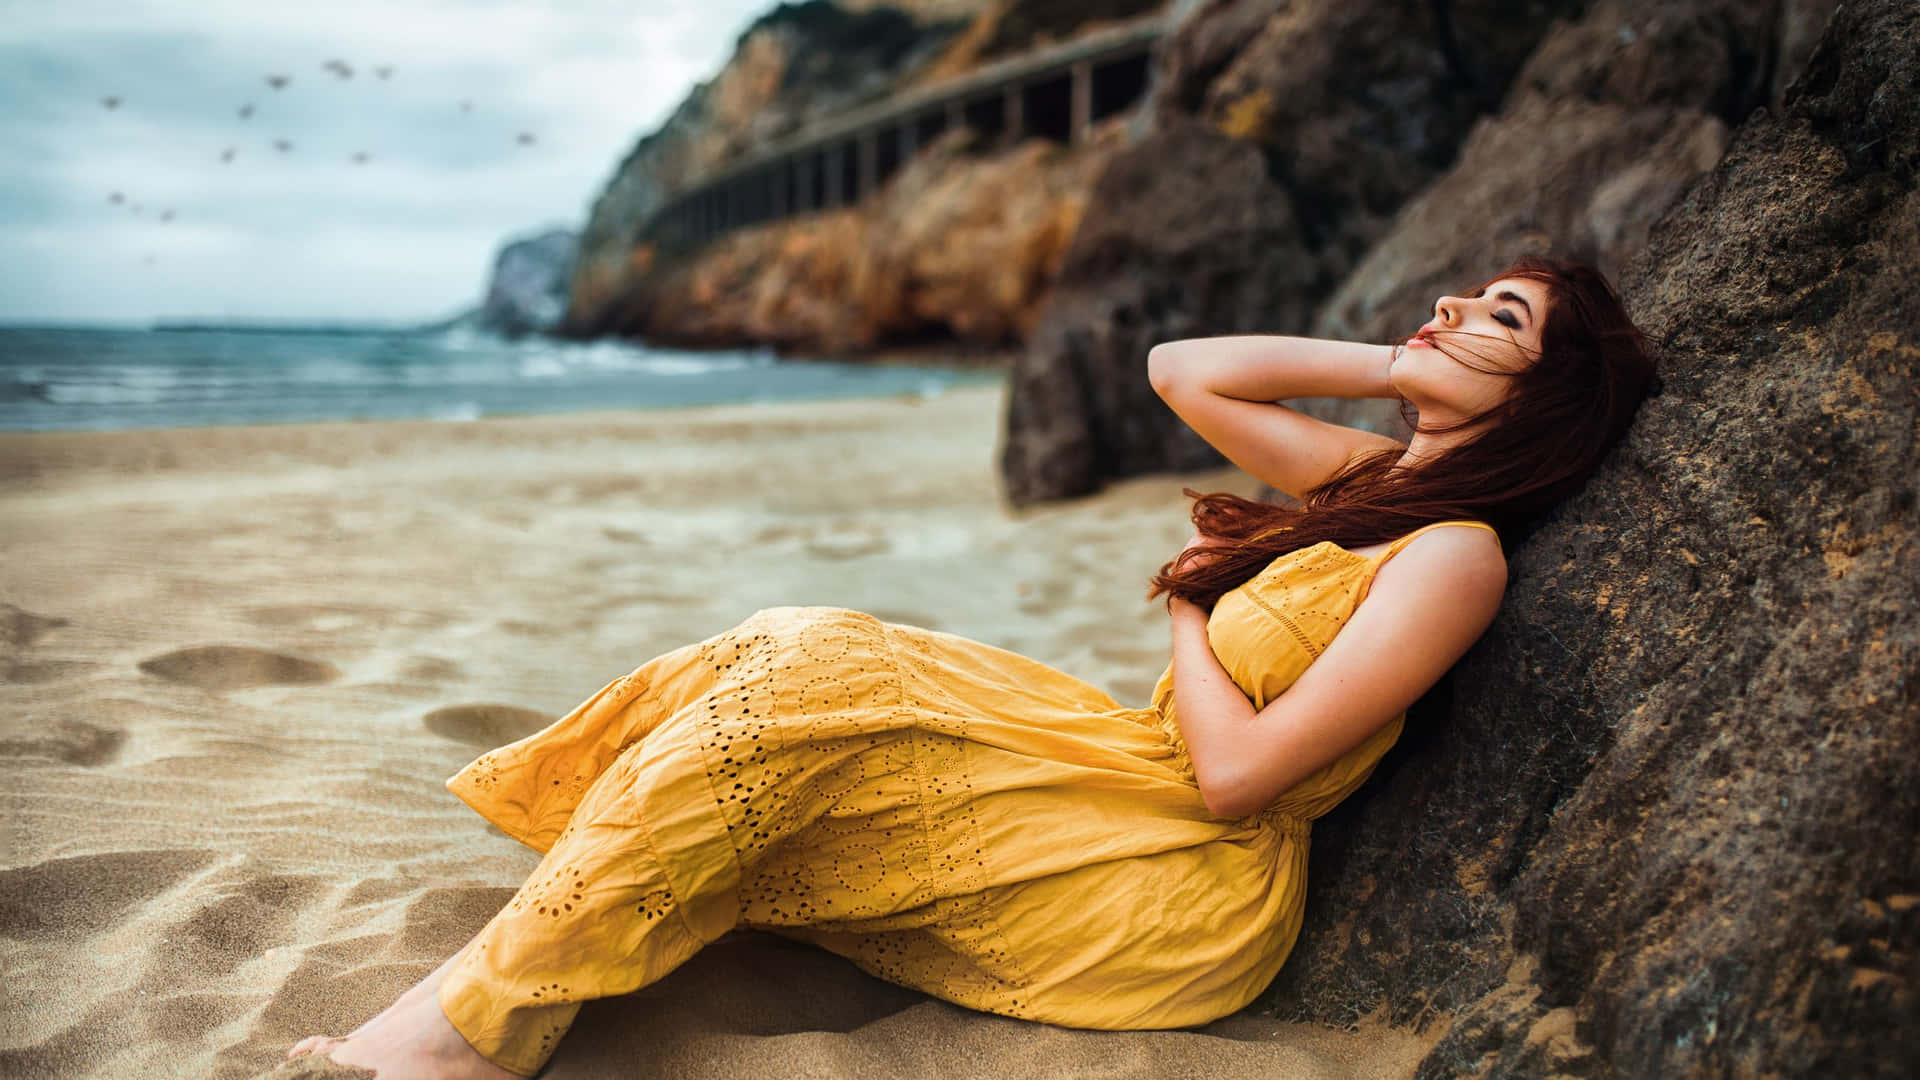 Captivating Woman Gazing At The Horizon On A Beach